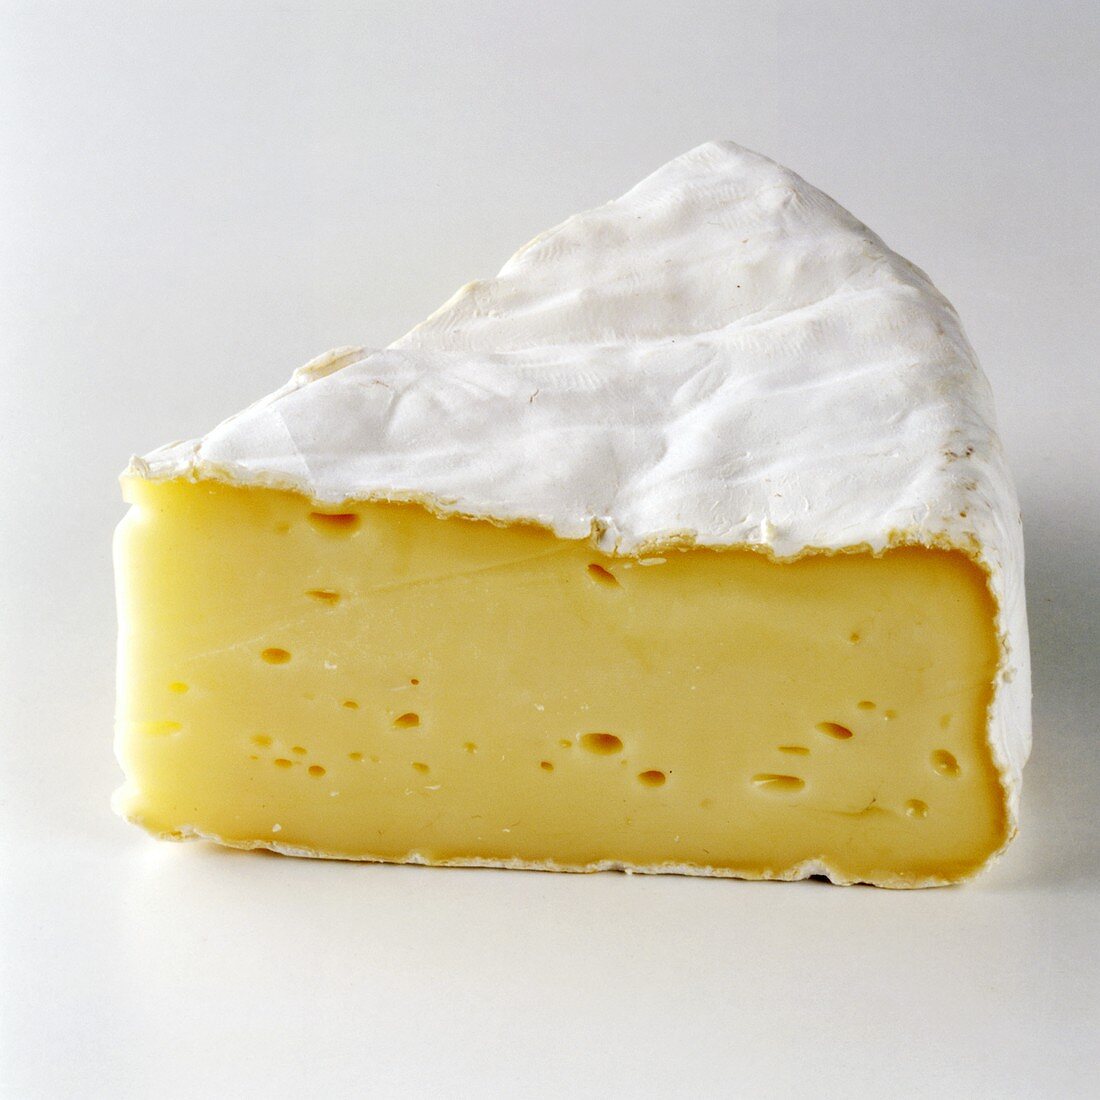 A Wedge of Camembert Cheese